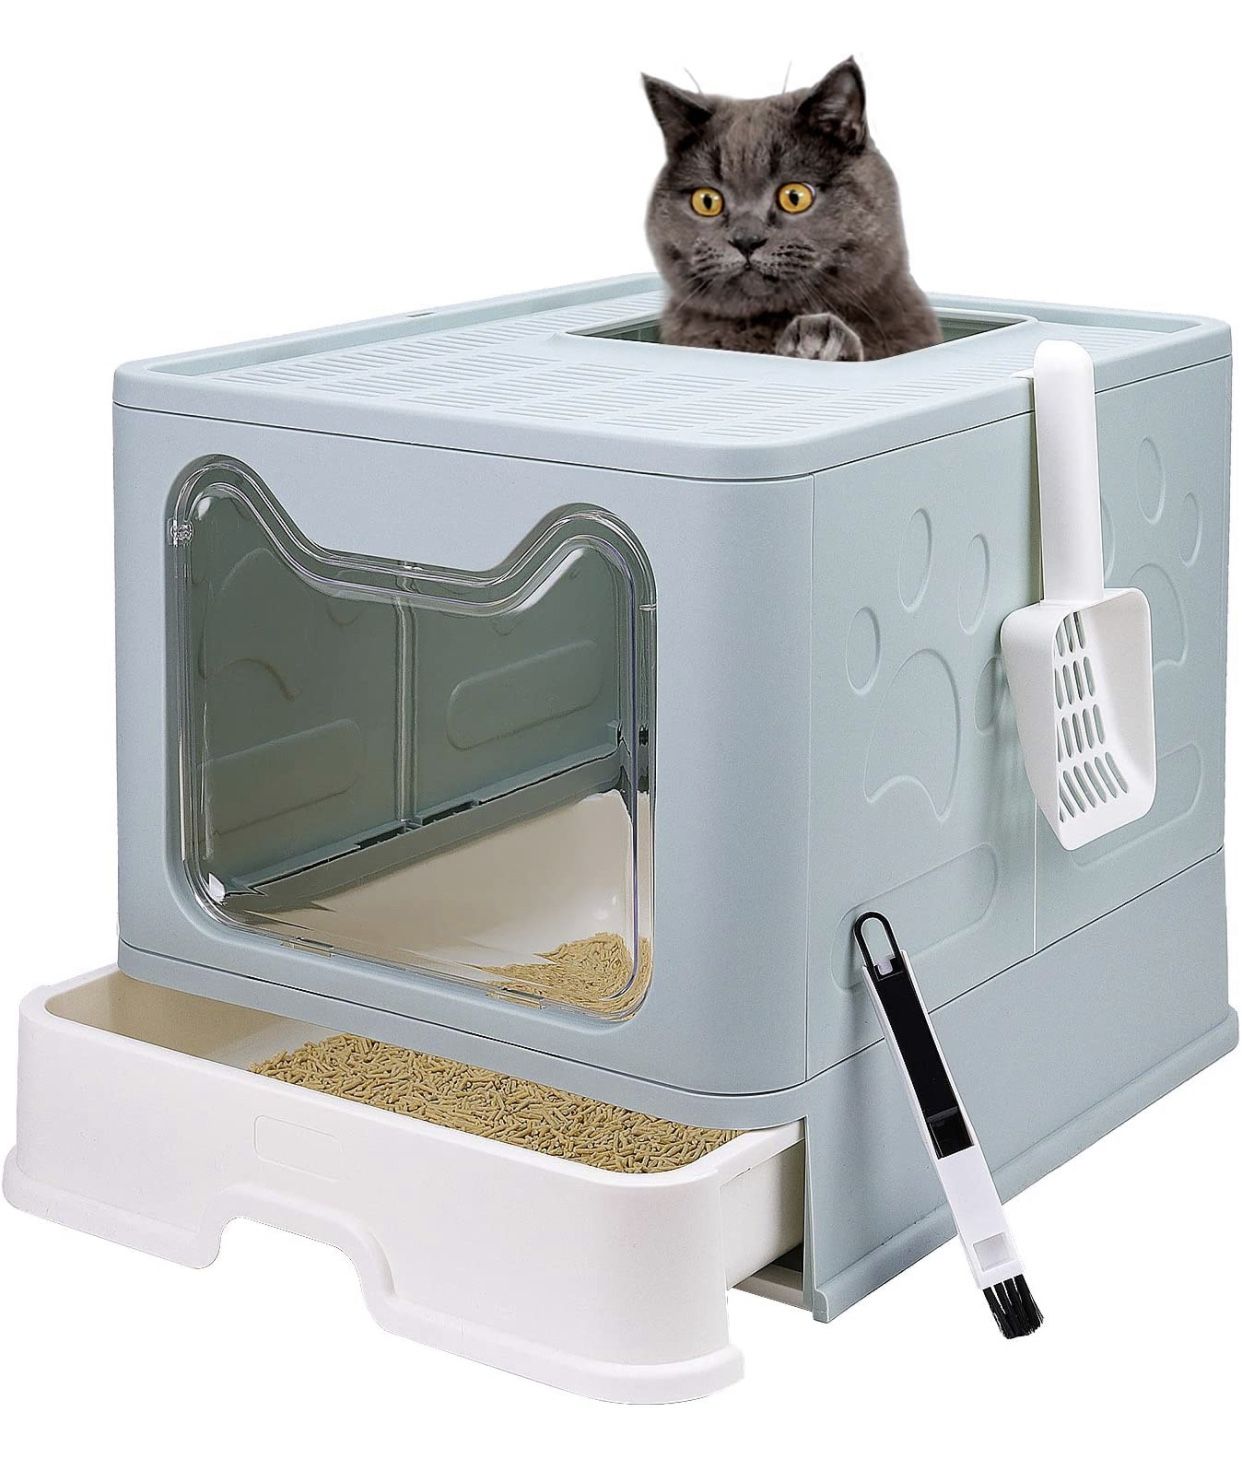 PetsPro Foldable Cat Litter Box with Lid, Enclosed Cat Potty, Top Entry Anti-Splashing Cat Toilet